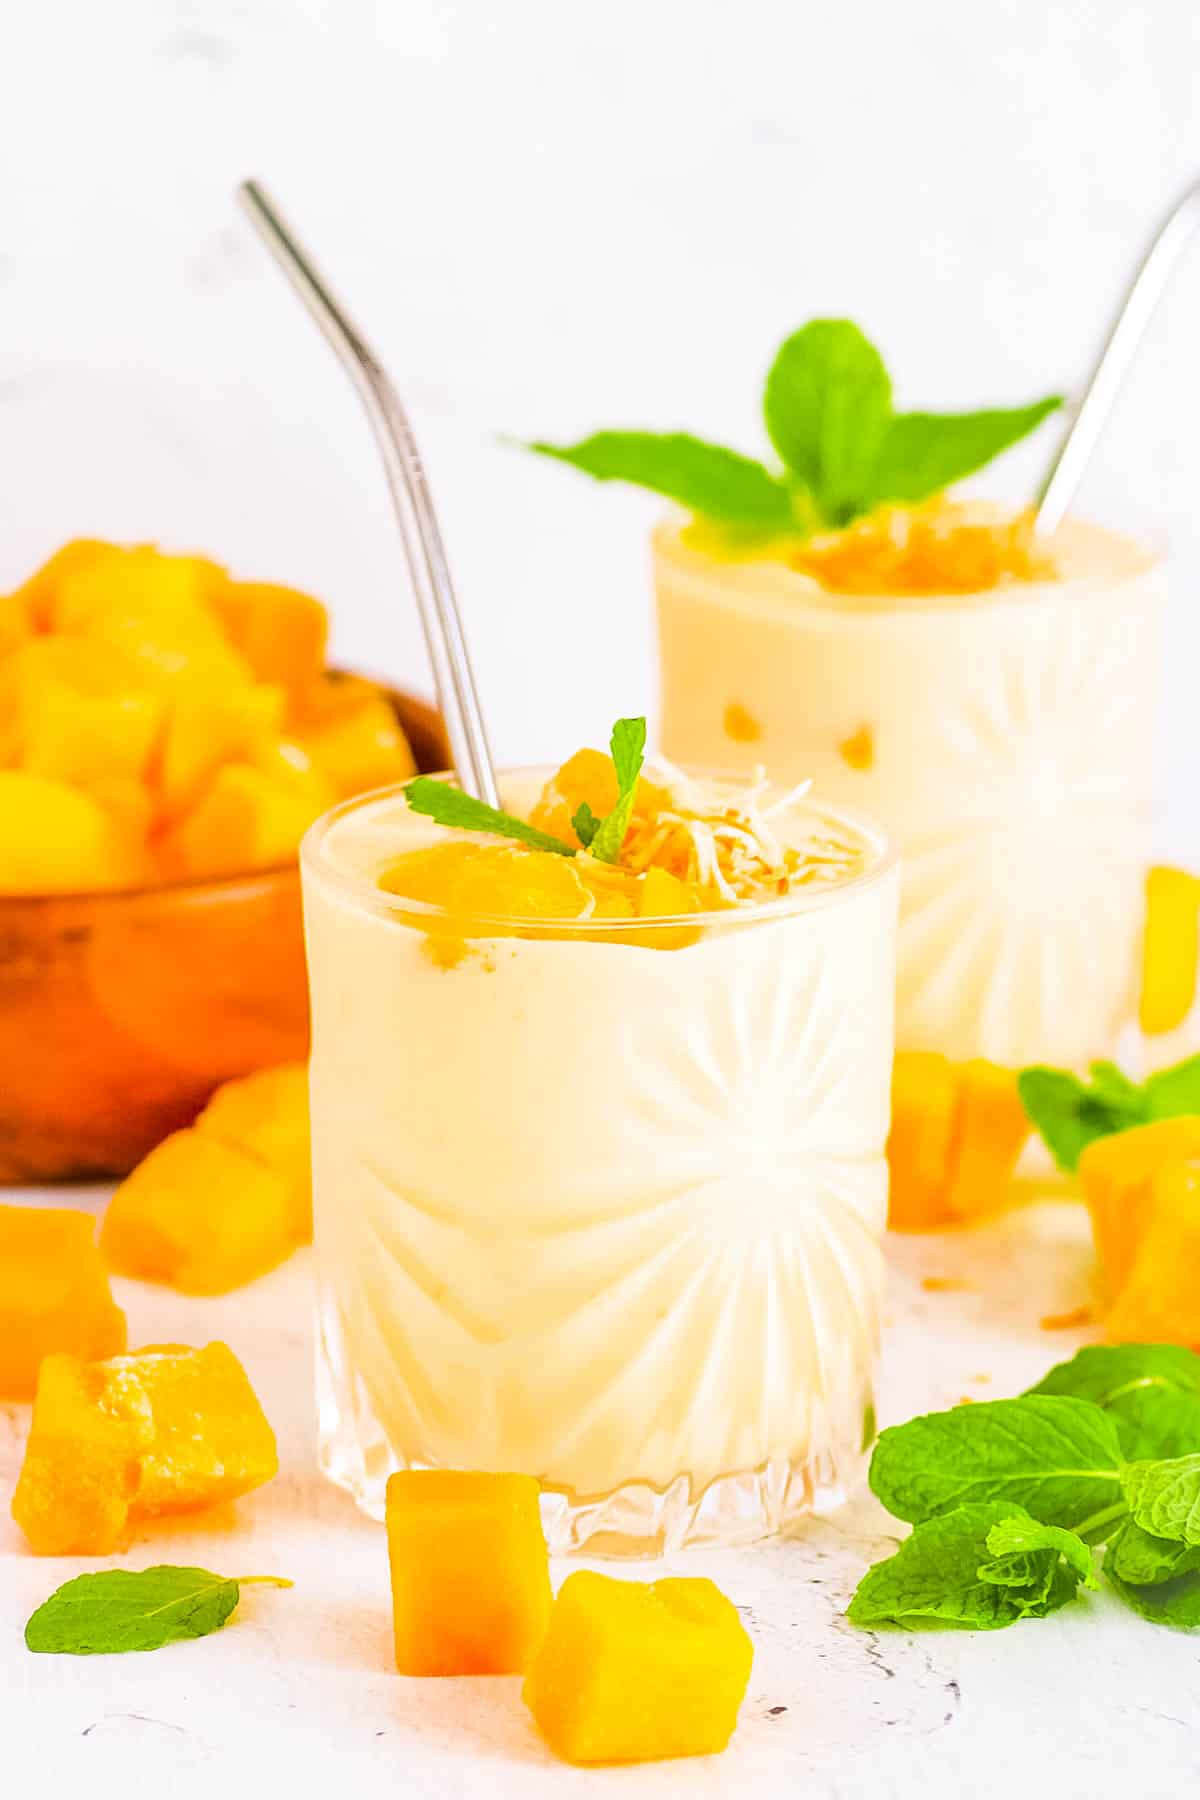 Healthy mango protein smoothie served in a gl،, garnished with mango c،ks and mint.